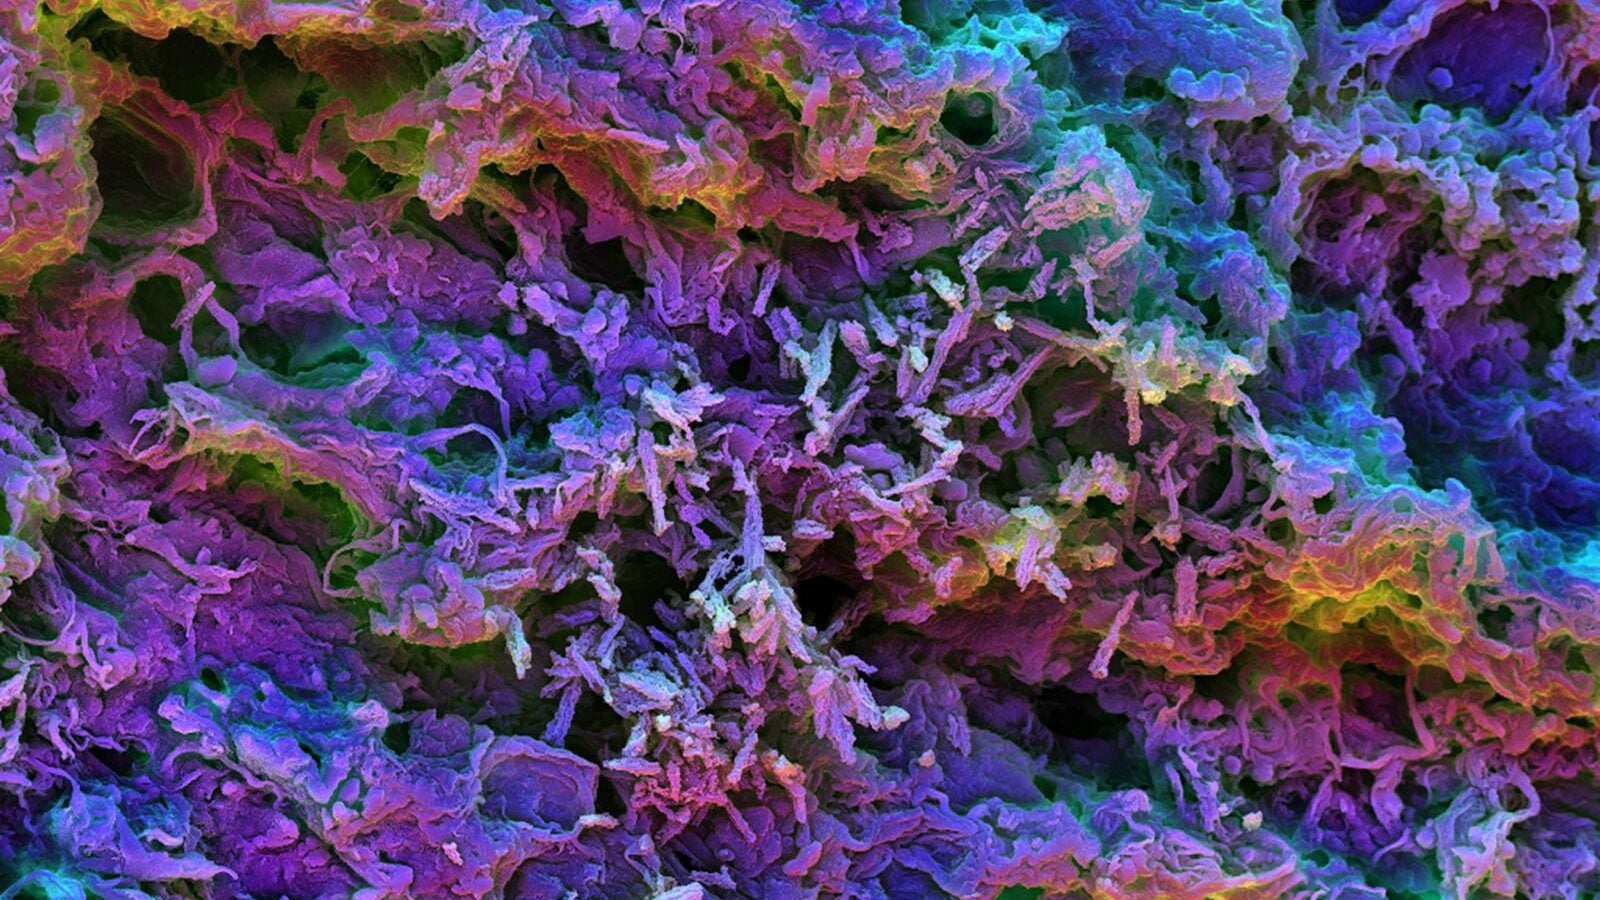 This scanning electron micrograph image shows the MSR-PEI scaffold presenting tumor-expressed peptides. After it’s injected under the skin of mice, the biomaterial fills with dendritic cells that can be seen here as small, round shapes interacting with the spiky scaffold structure.